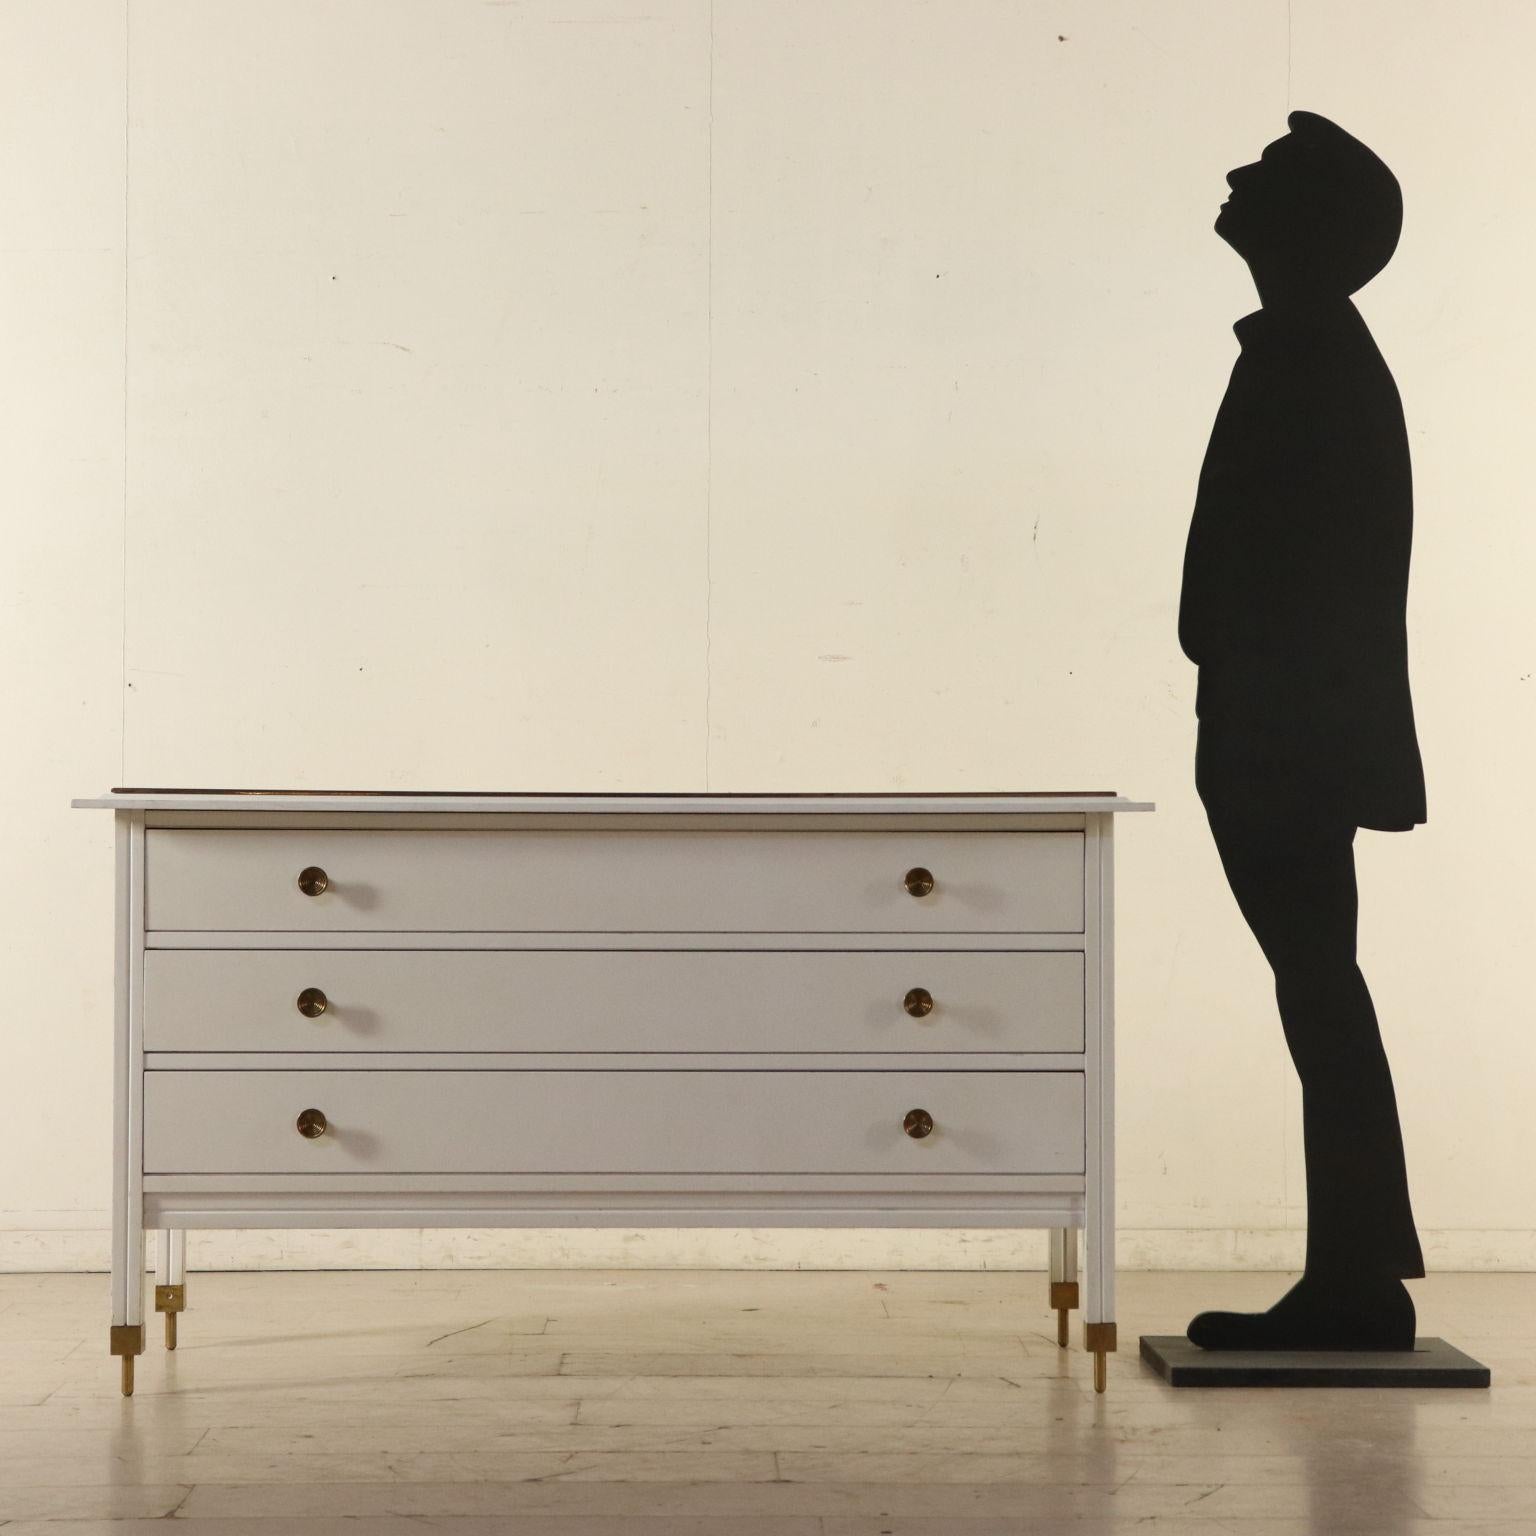 A chest of drawers designed by Carlo de Carli (1911-1969) for Sormani. Lacquered wood, mirrored glass, brass ferrules and handles. Manufactured in Italy, 1960s.